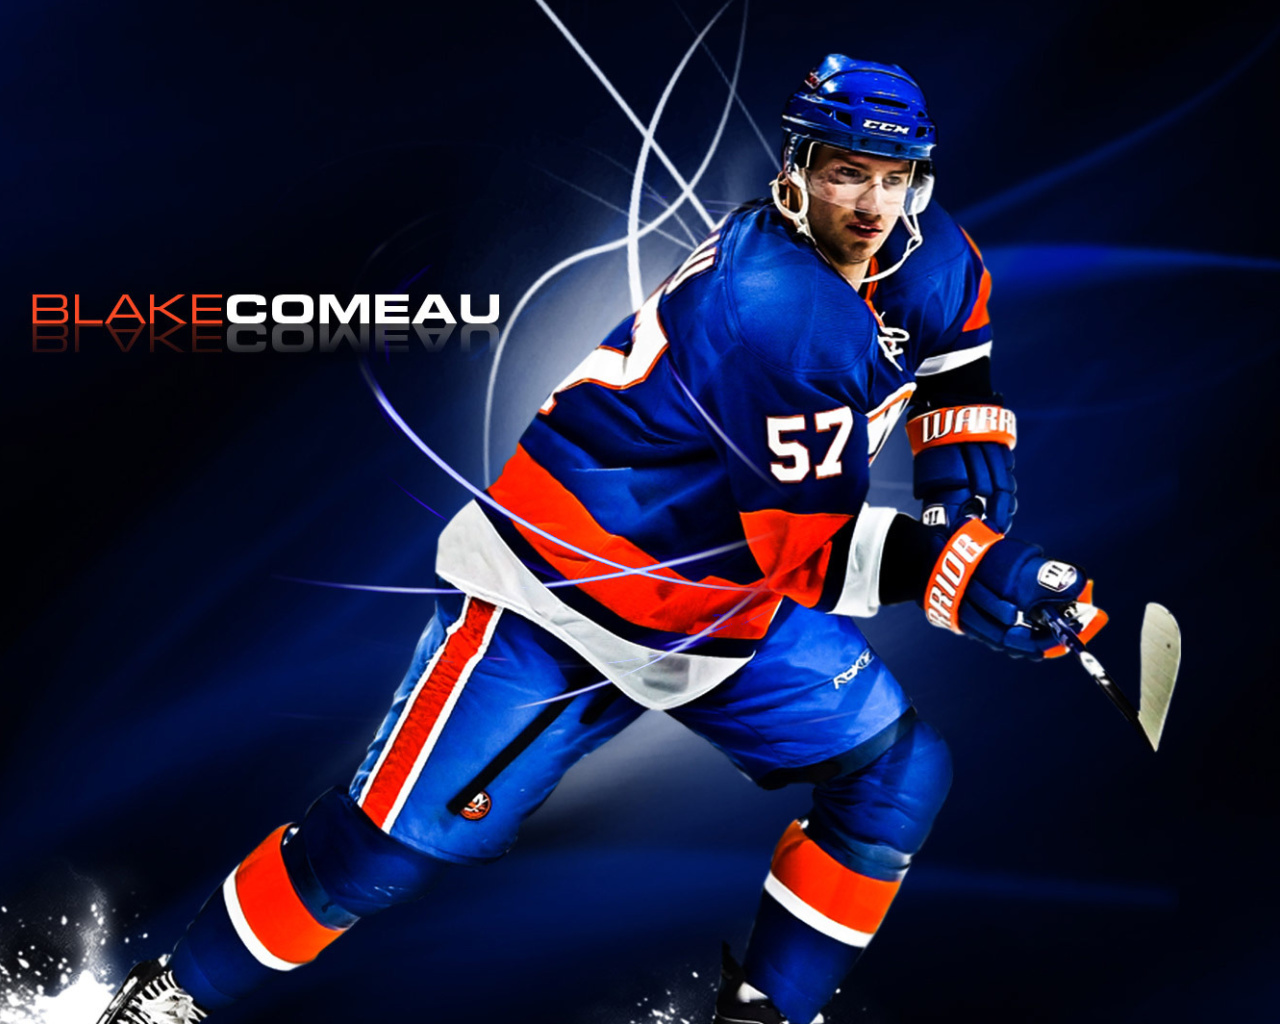 Blake Comeau from HL wallpaper 1280x1024